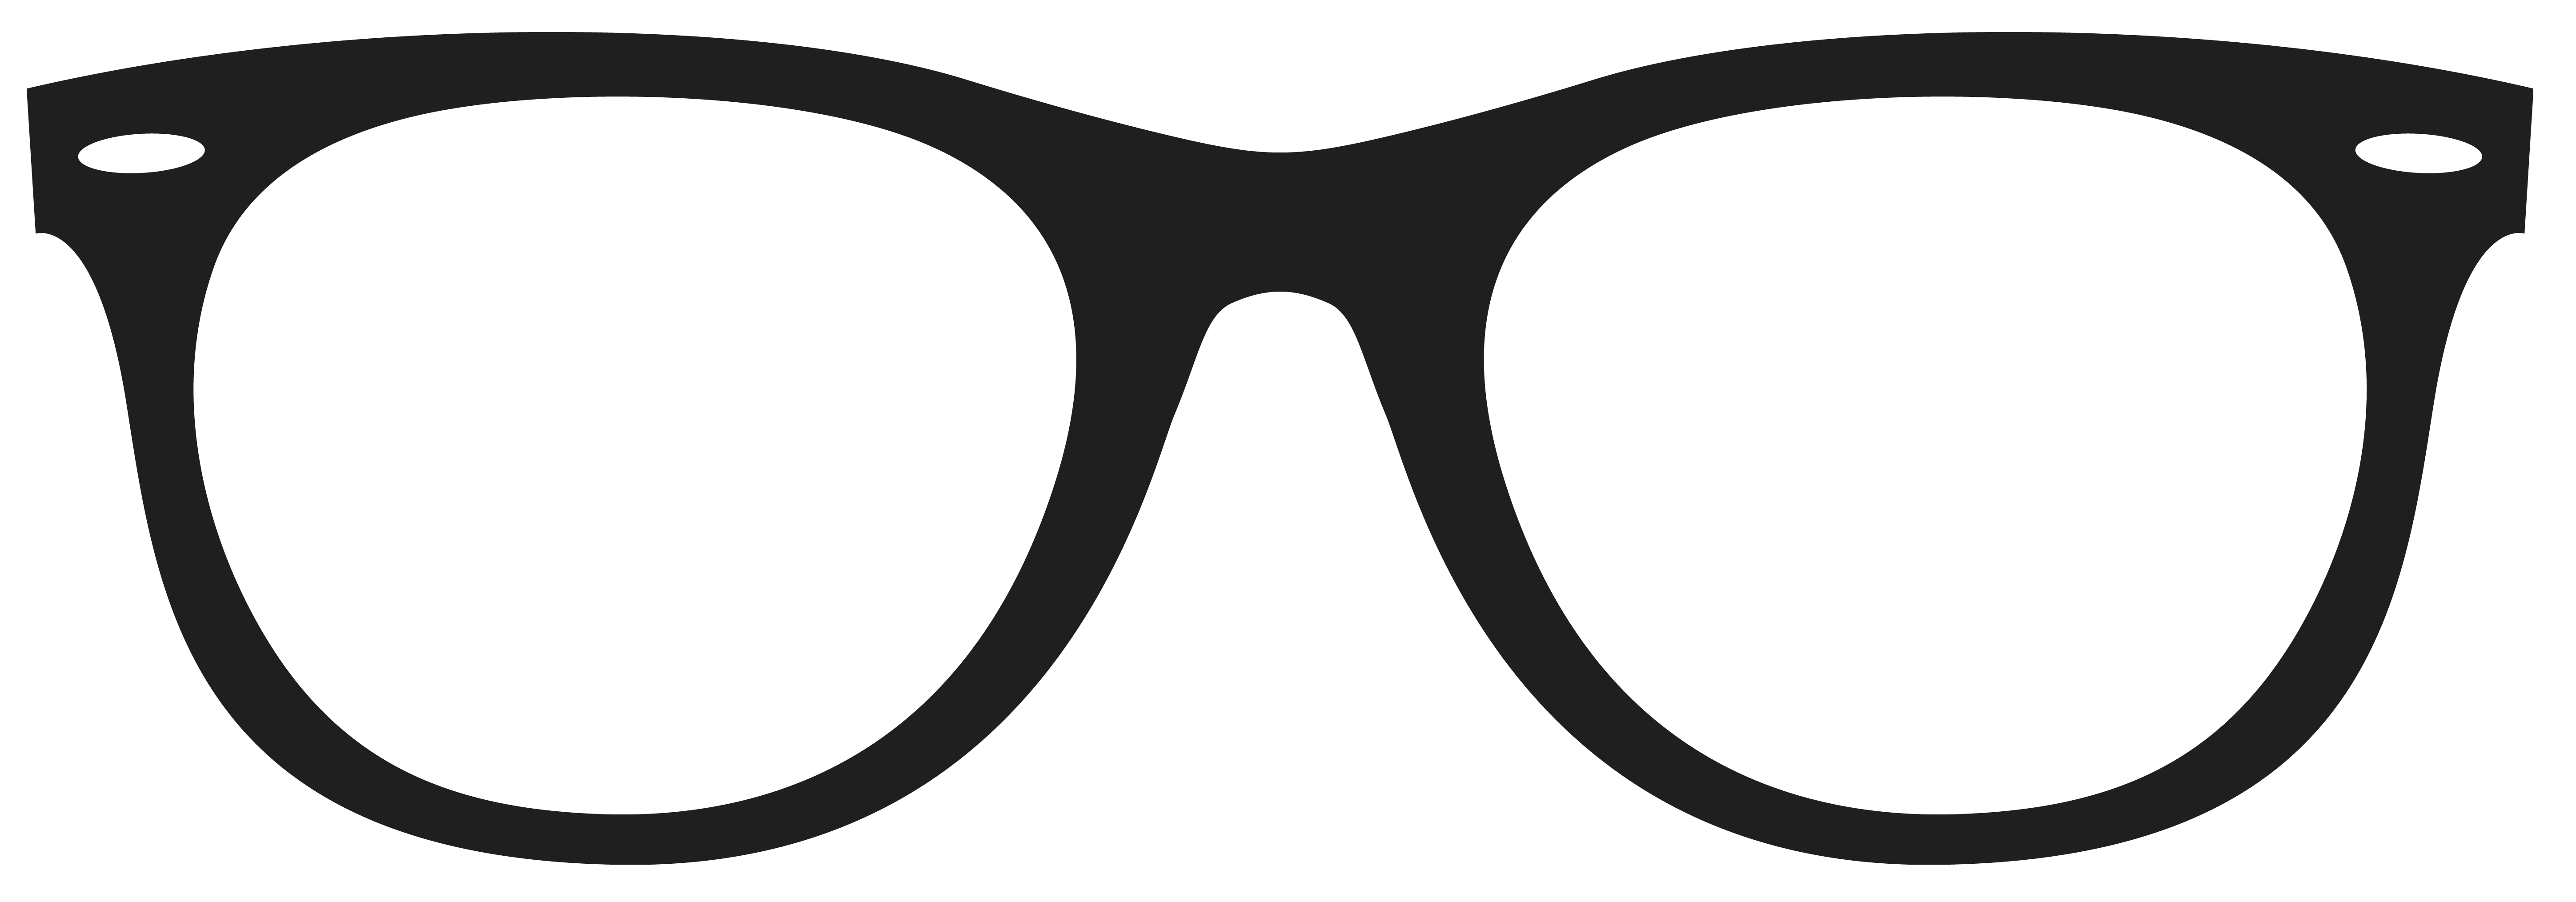 Goggles clipart outline.  collection of geek